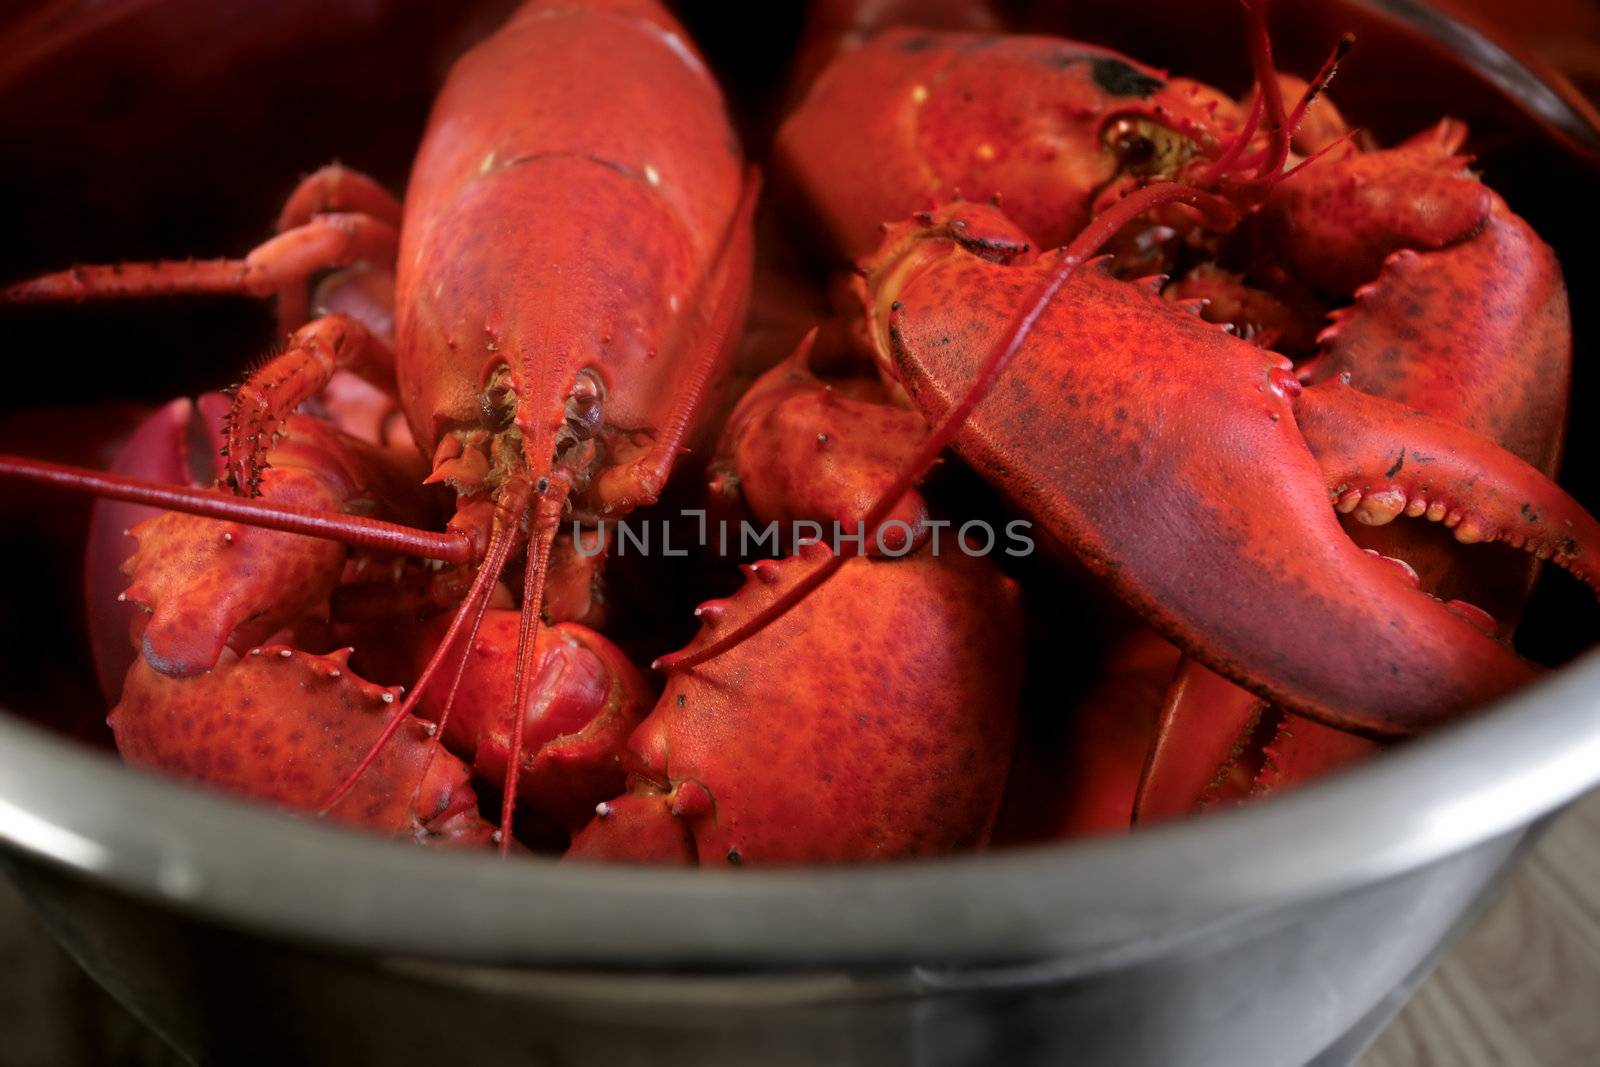 A pot of boiled lobster from Nova Scotia, Canada.